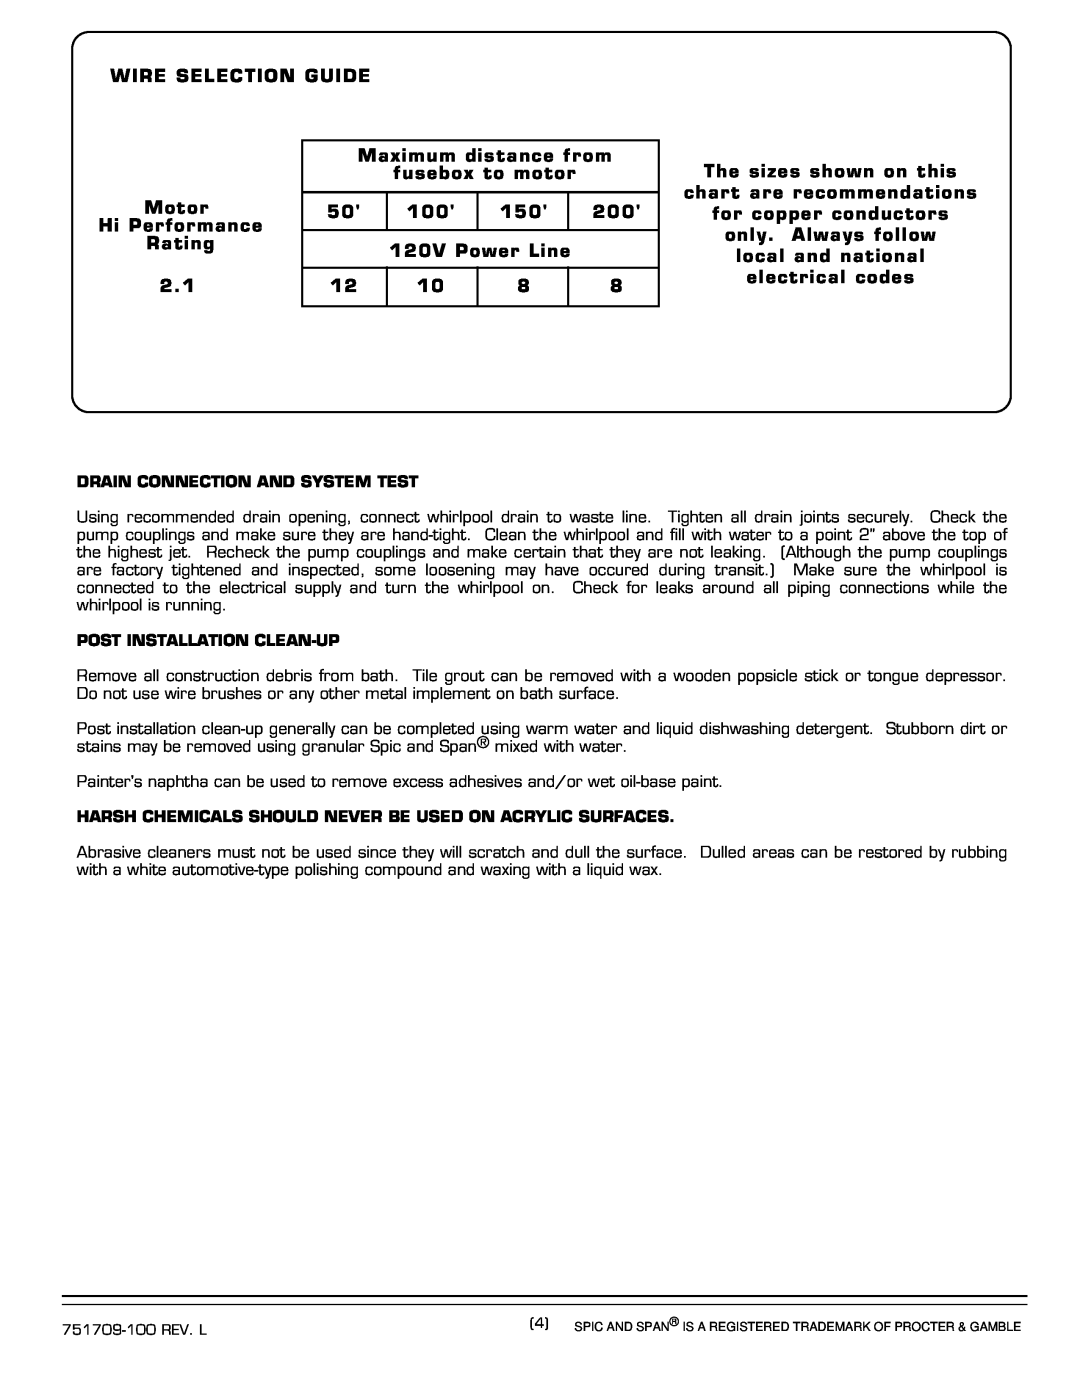 American Standard 7242.XXXW installation instructions Wire Selection Guide 